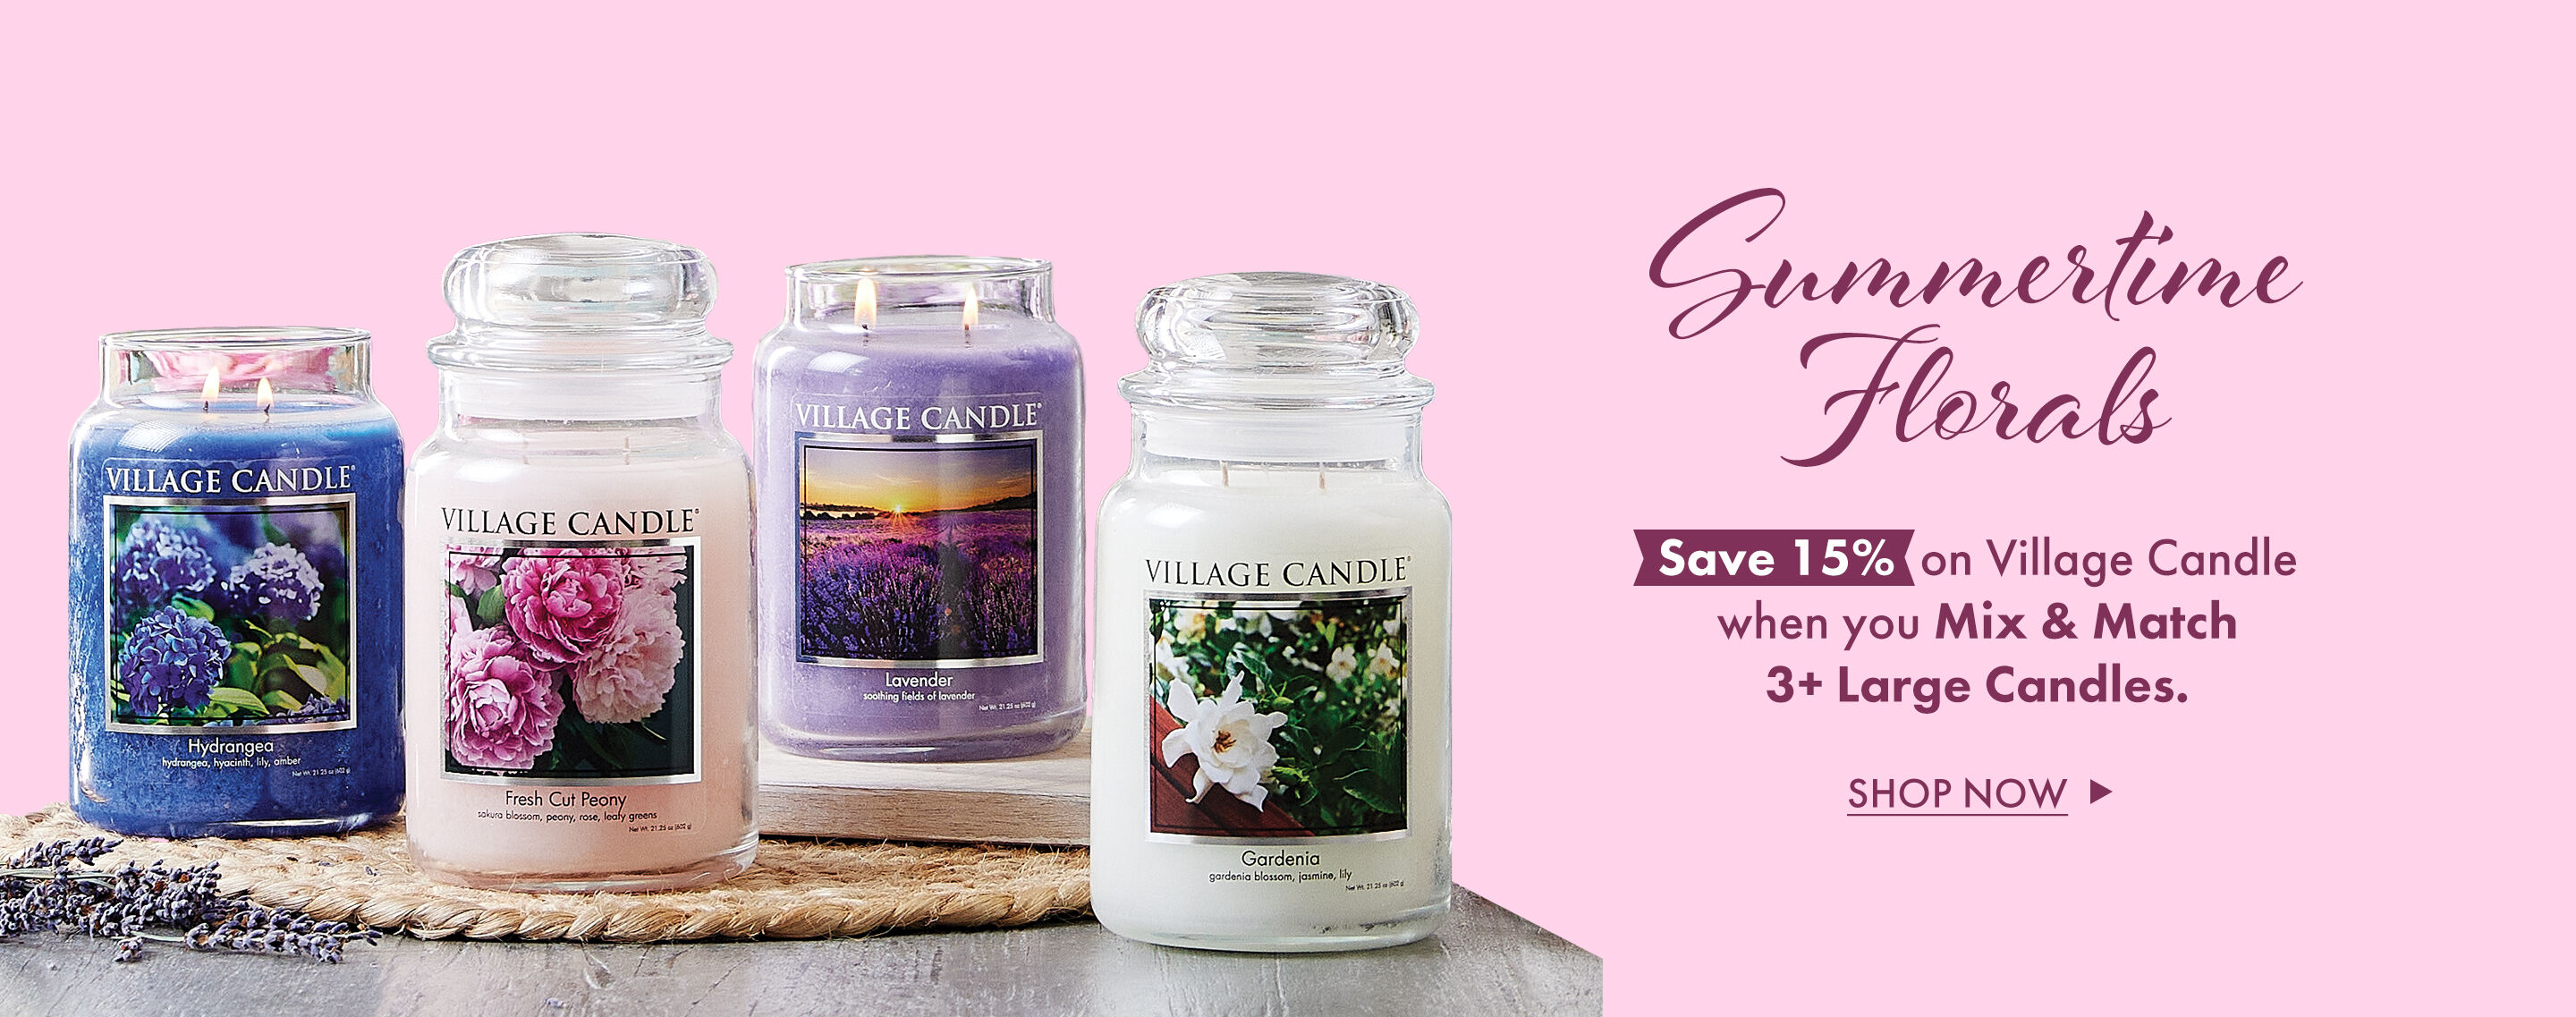 Summertime Florals​ – Save 15%  on Village Candle when you Mix & Match3+ Large Candles - Shop Now